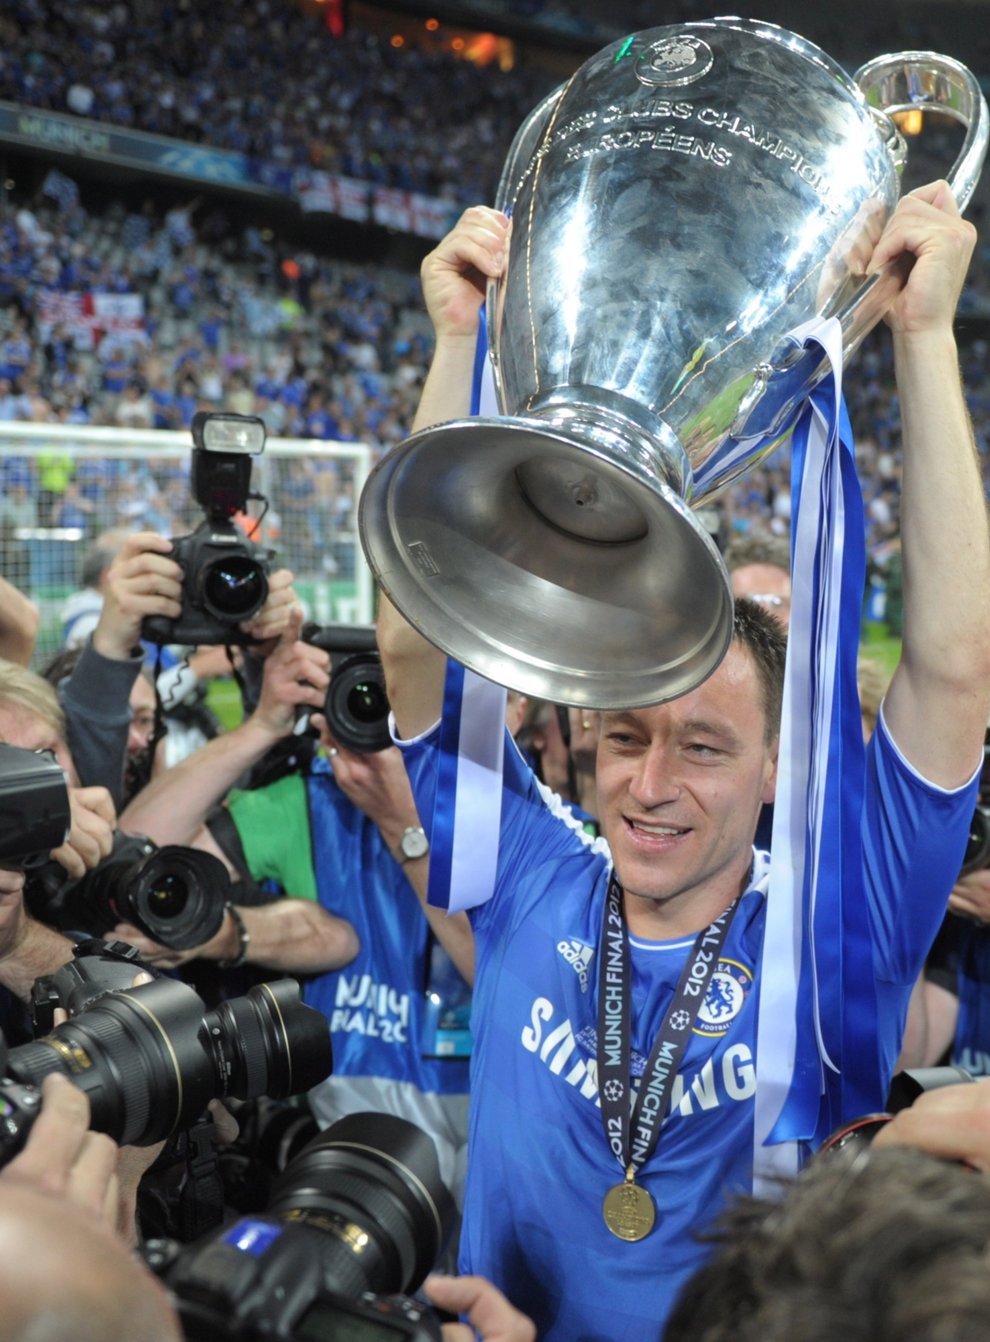 Terry was mocked for changing into his strip to celebrate Chelsea's Champions League triumph despite not being eligible to play in the final (PA Images)